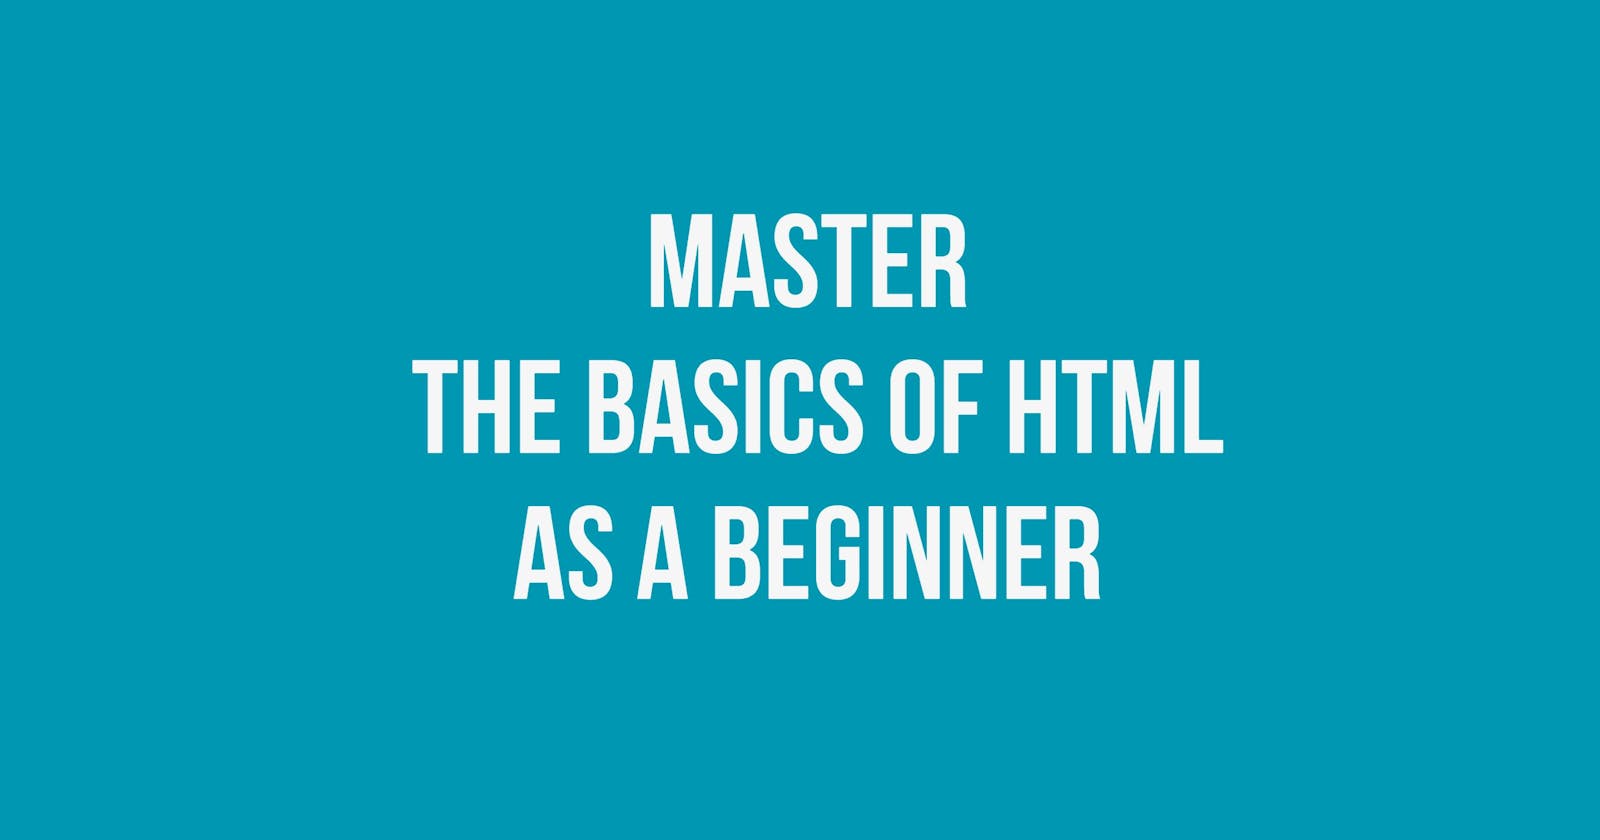 Get Started with HTML: The Top 20 Essential Tags Every Beginner Should Know